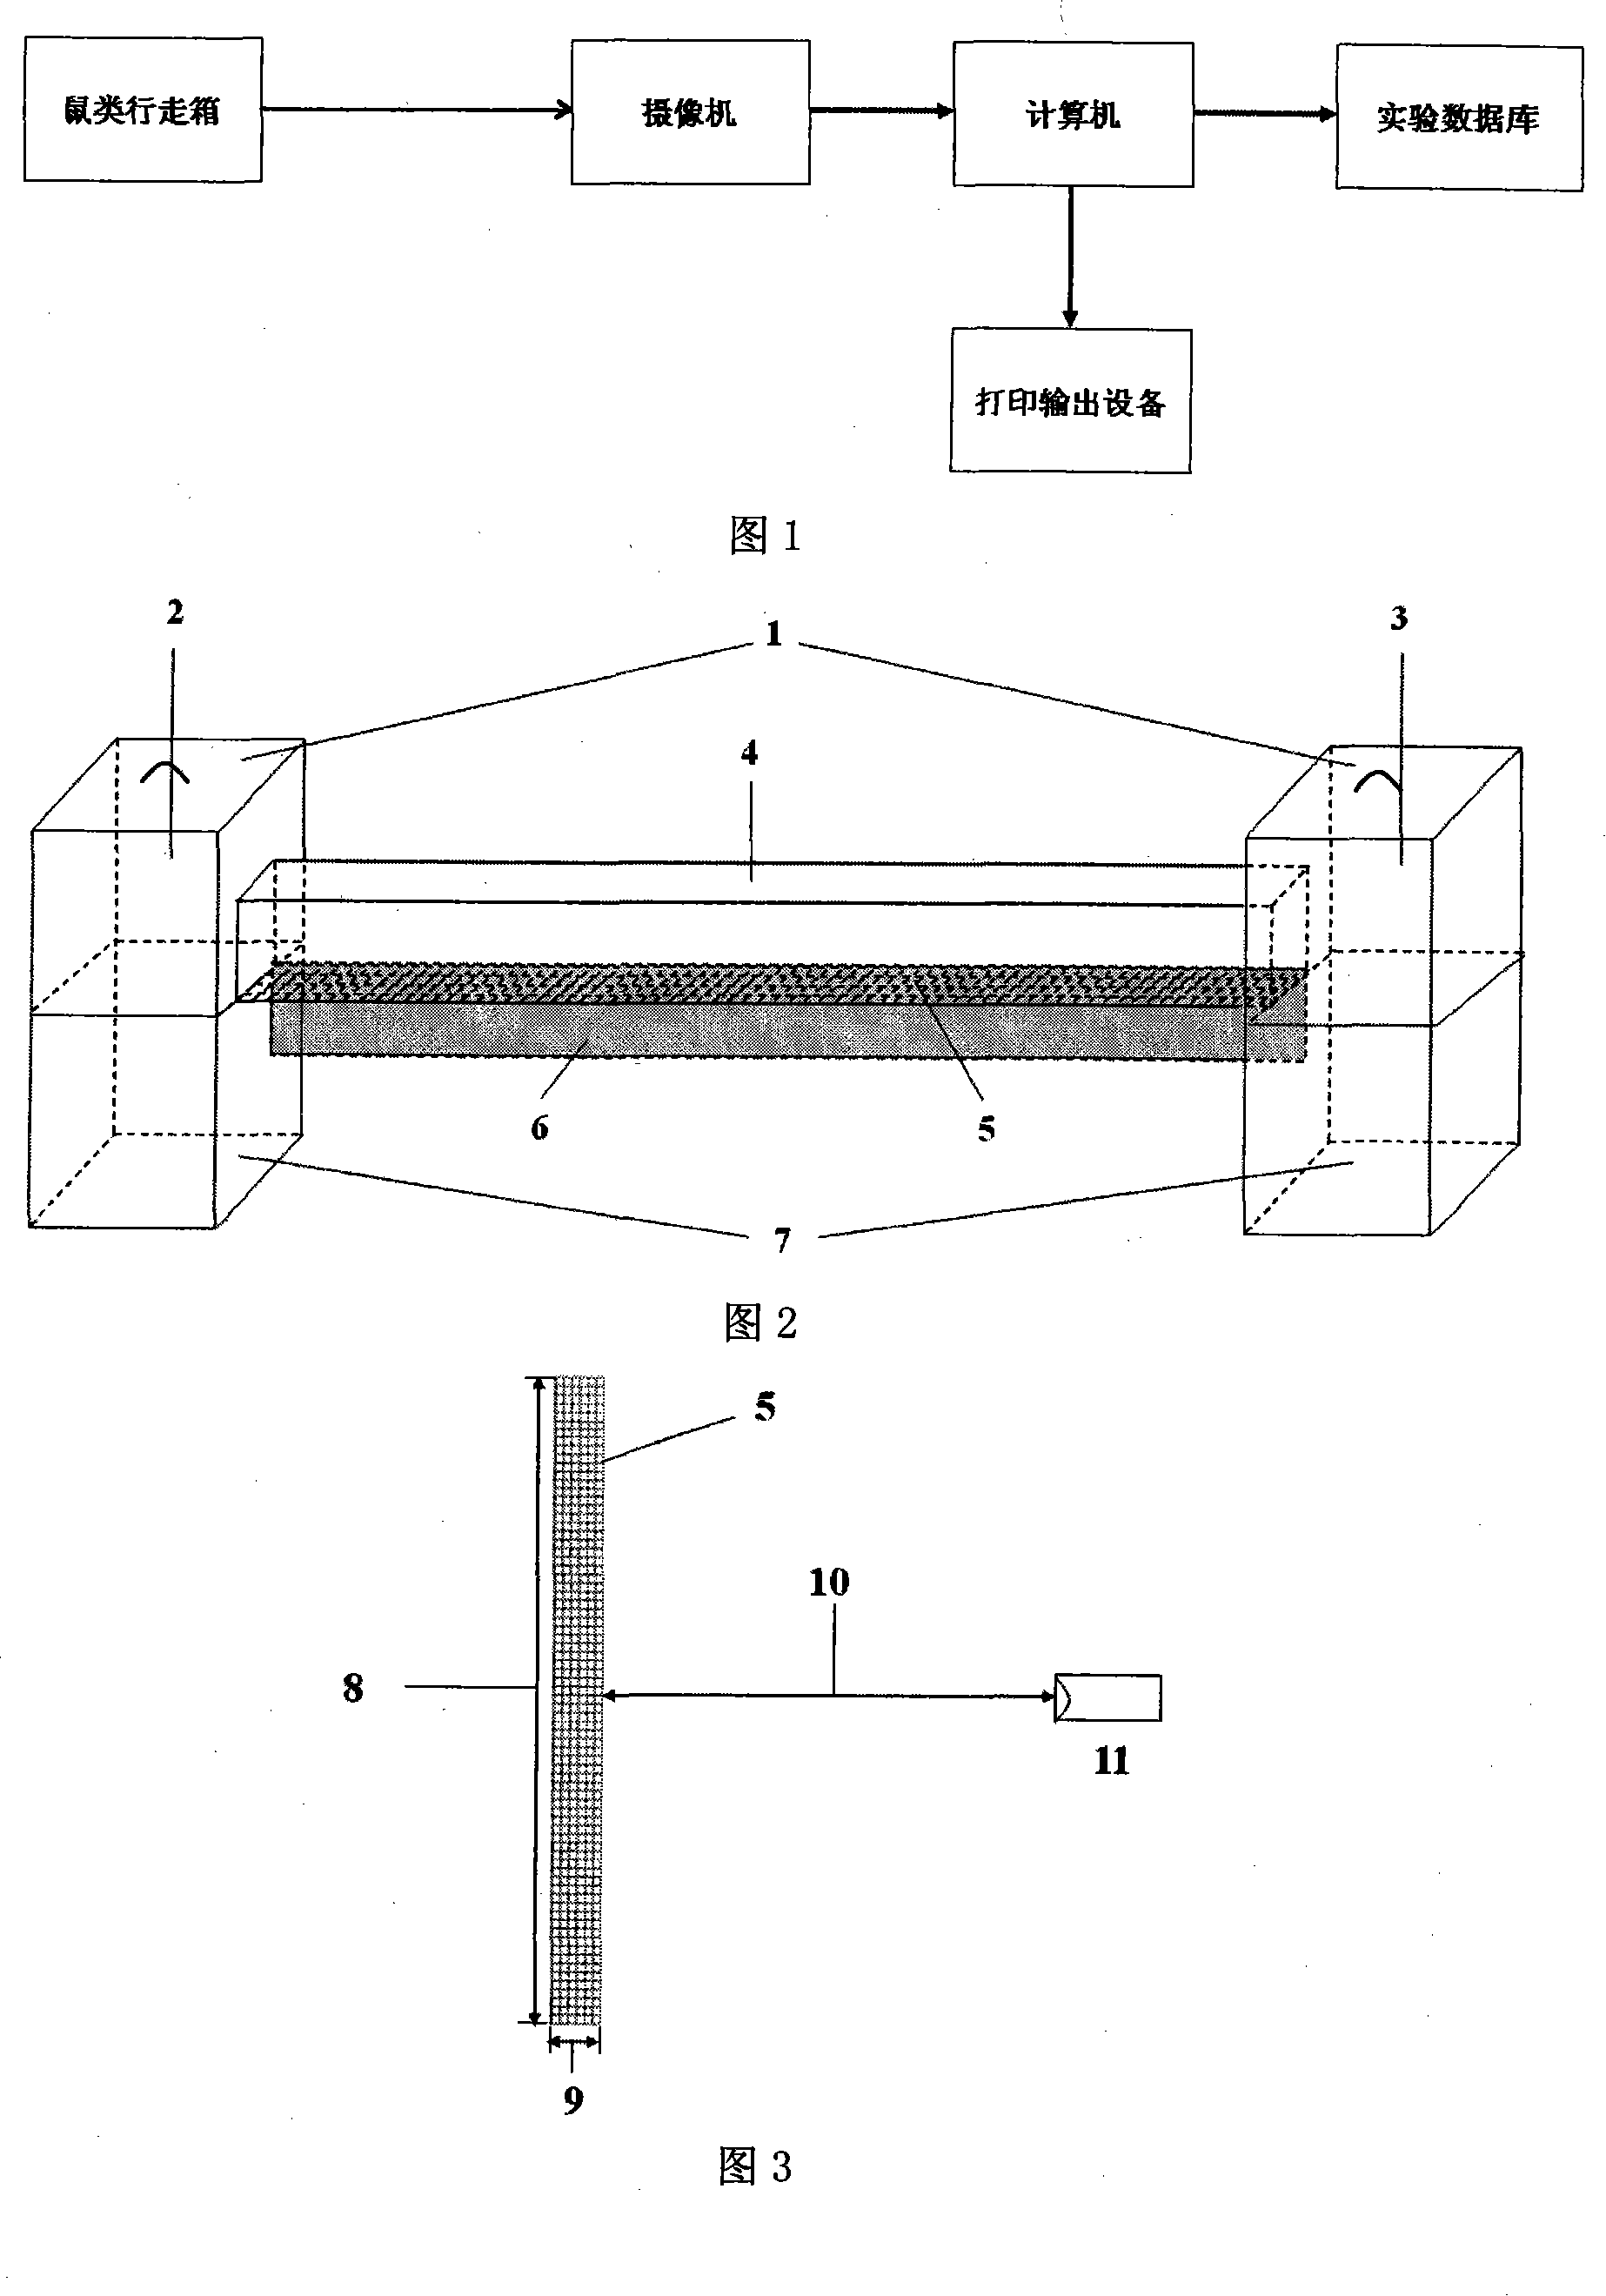 Rat sports ability detecting method and system